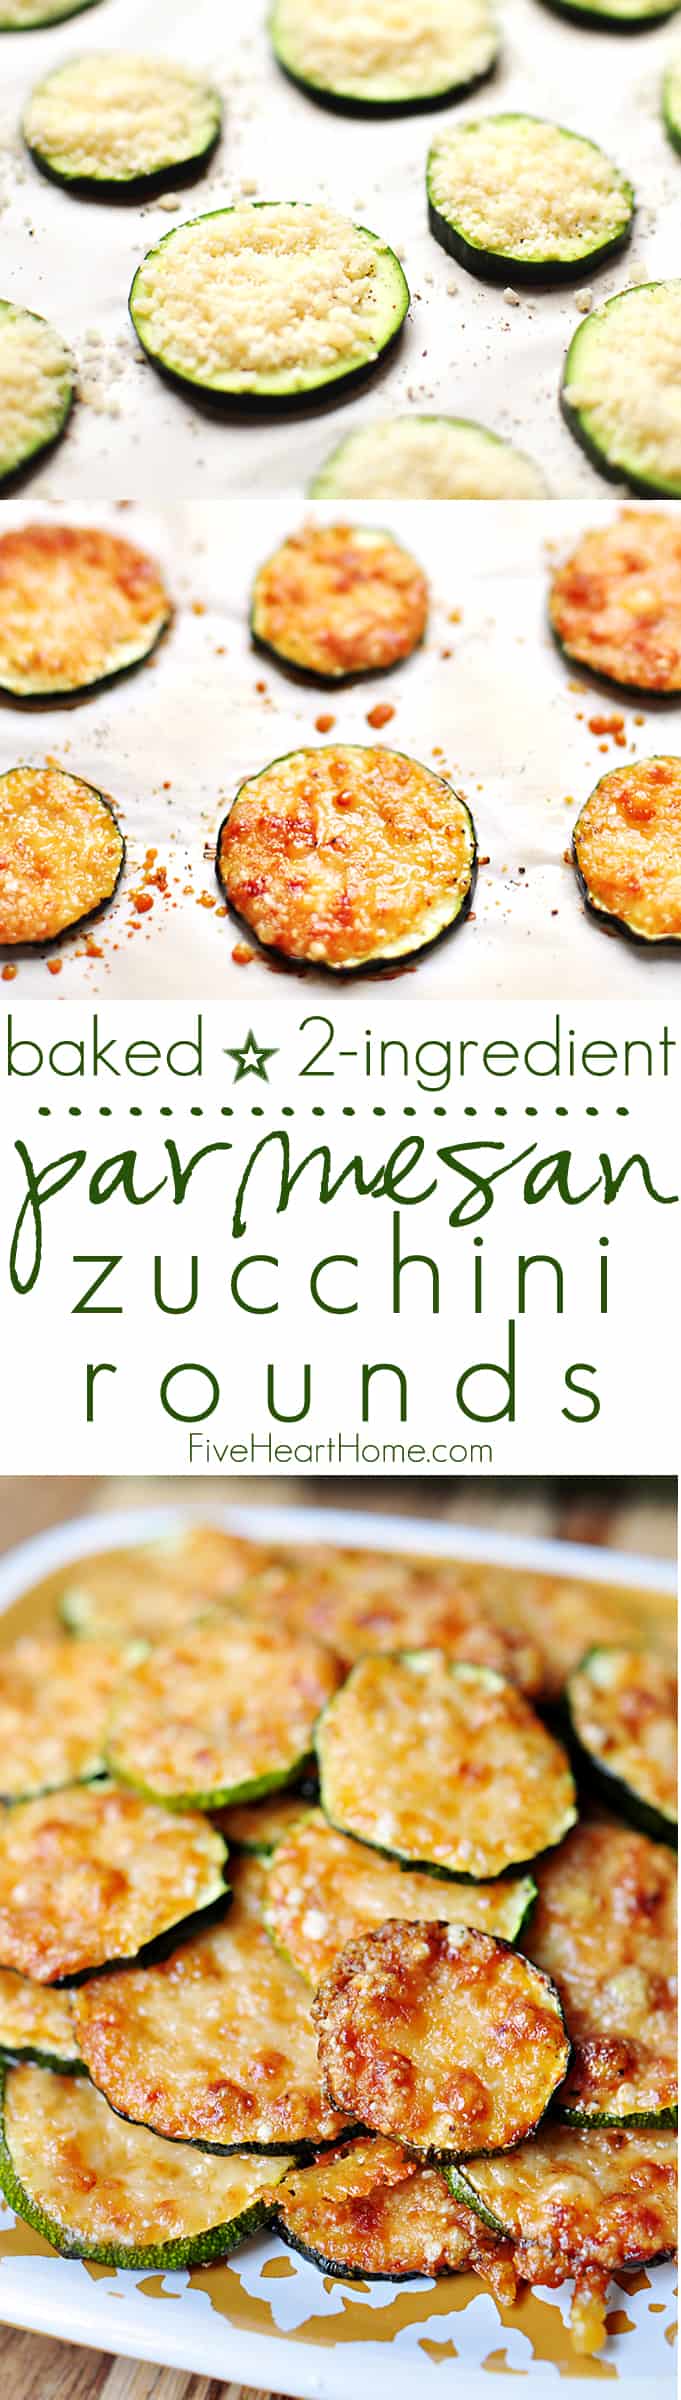 Baked Parmesan Zucchini Rounds ~ you're just 2 ingredients away from a quick and easy, delicious summer side dish! | FiveHeartHome.com via @fivehearthome